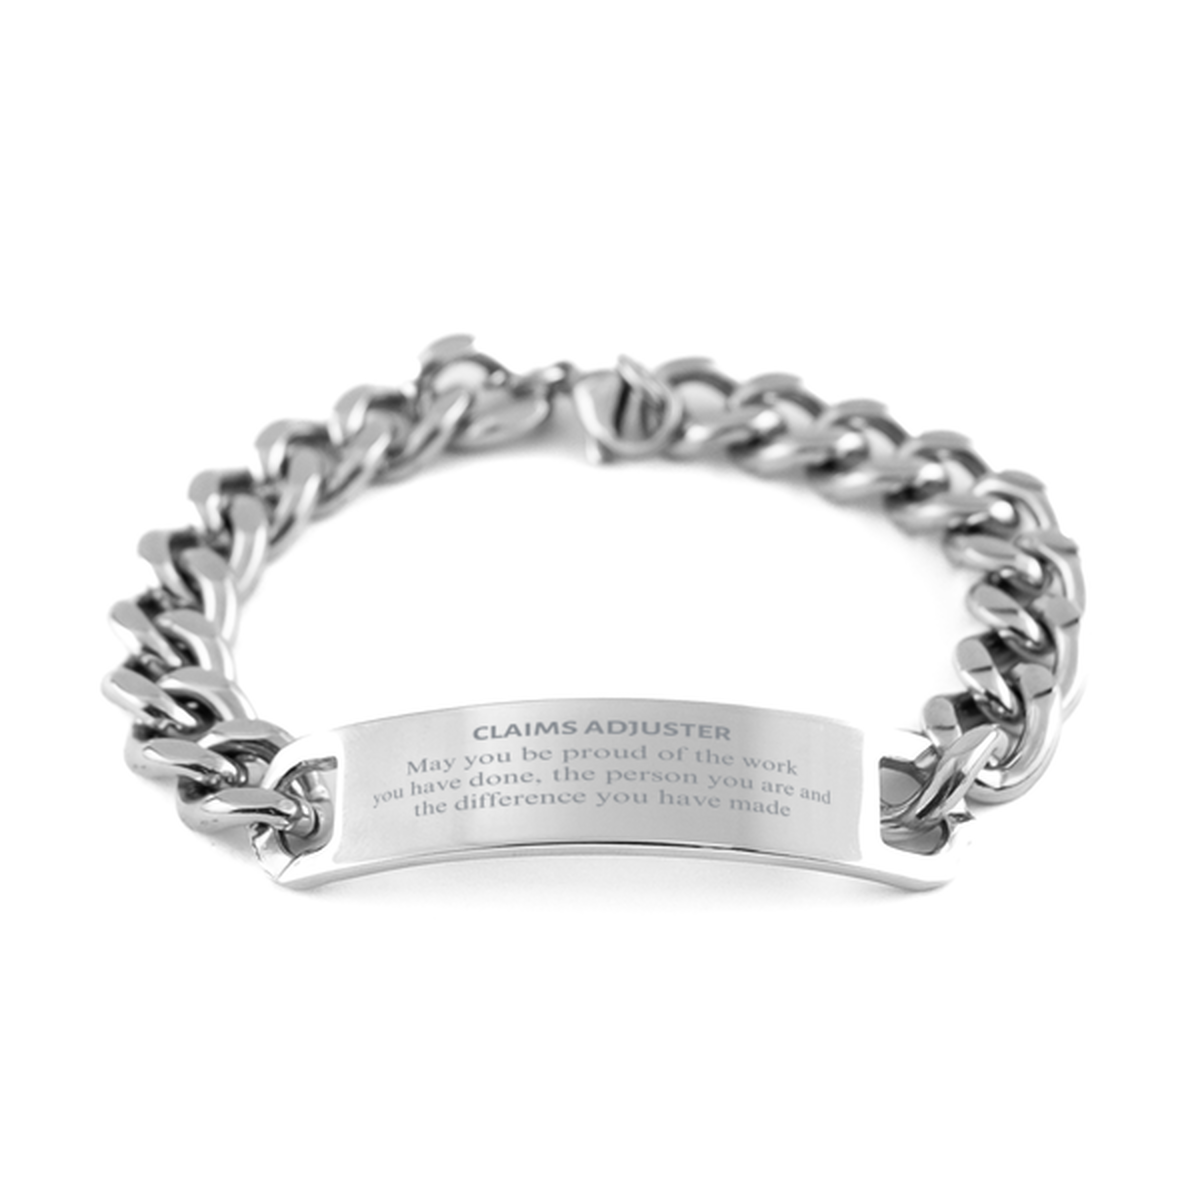 Claims Adjuster May you be proud of the work you have done, Retirement Claims Adjuster Cuban Chain Stainless Steel Bracelet for Colleague Appreciation Gifts Amazing for Claims Adjuster